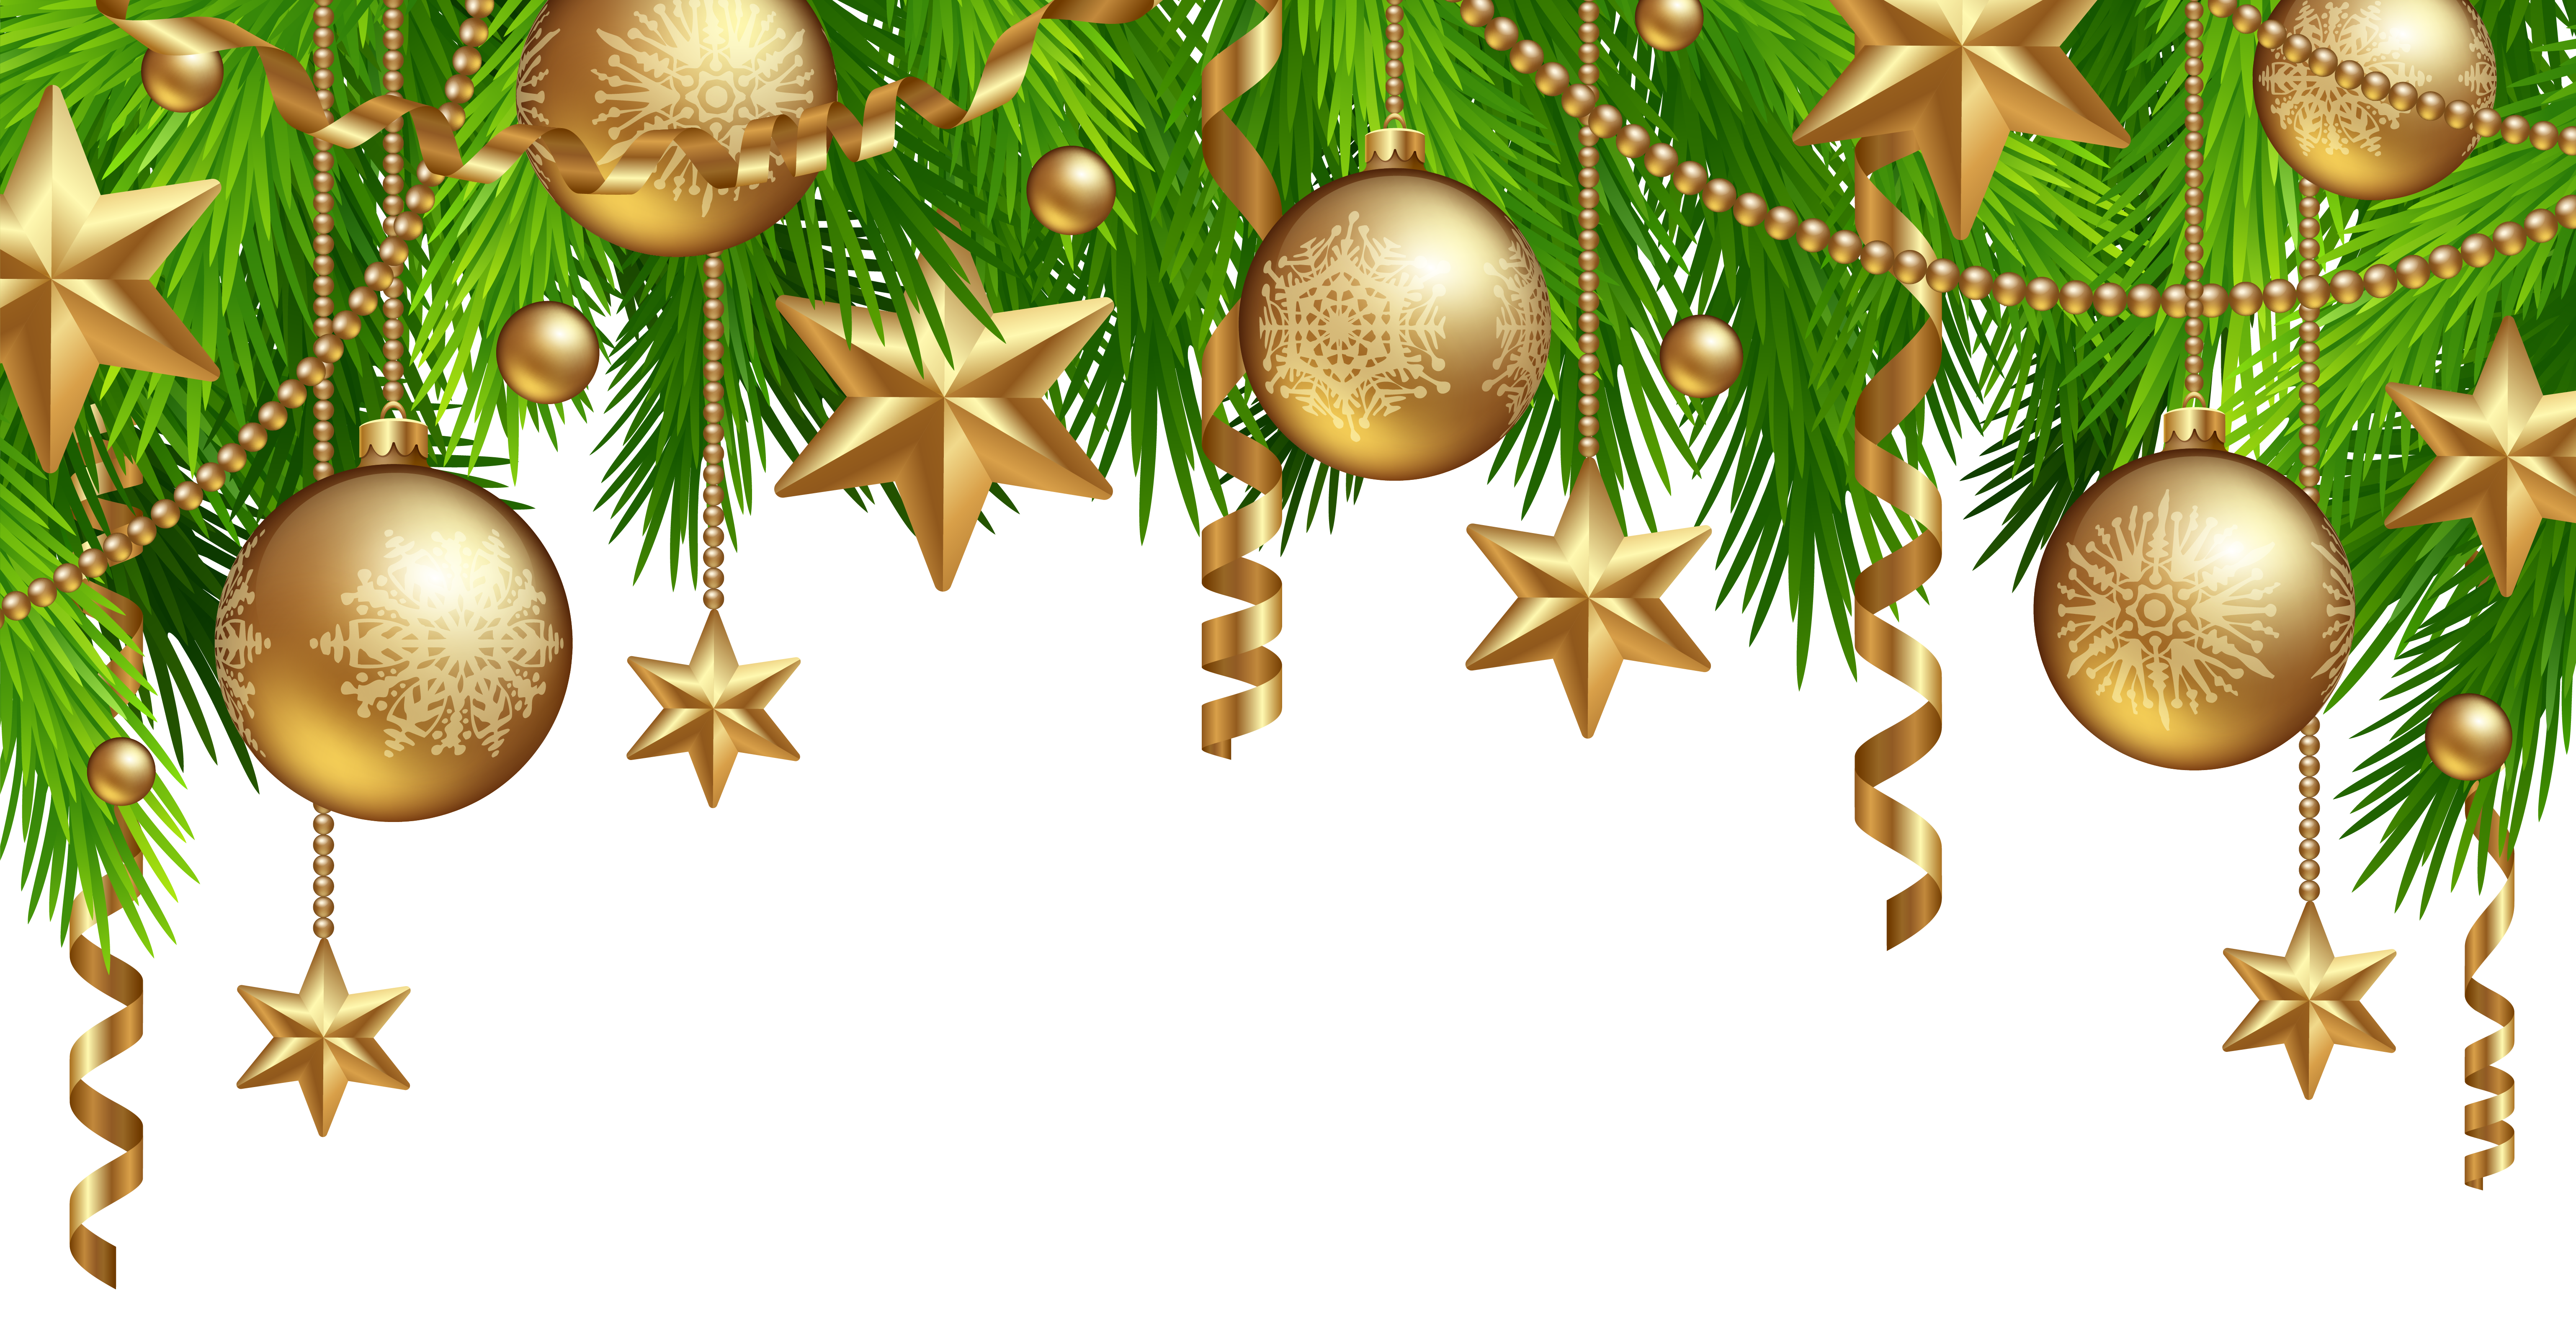 Christmas border decor png. Garland clipart bauble